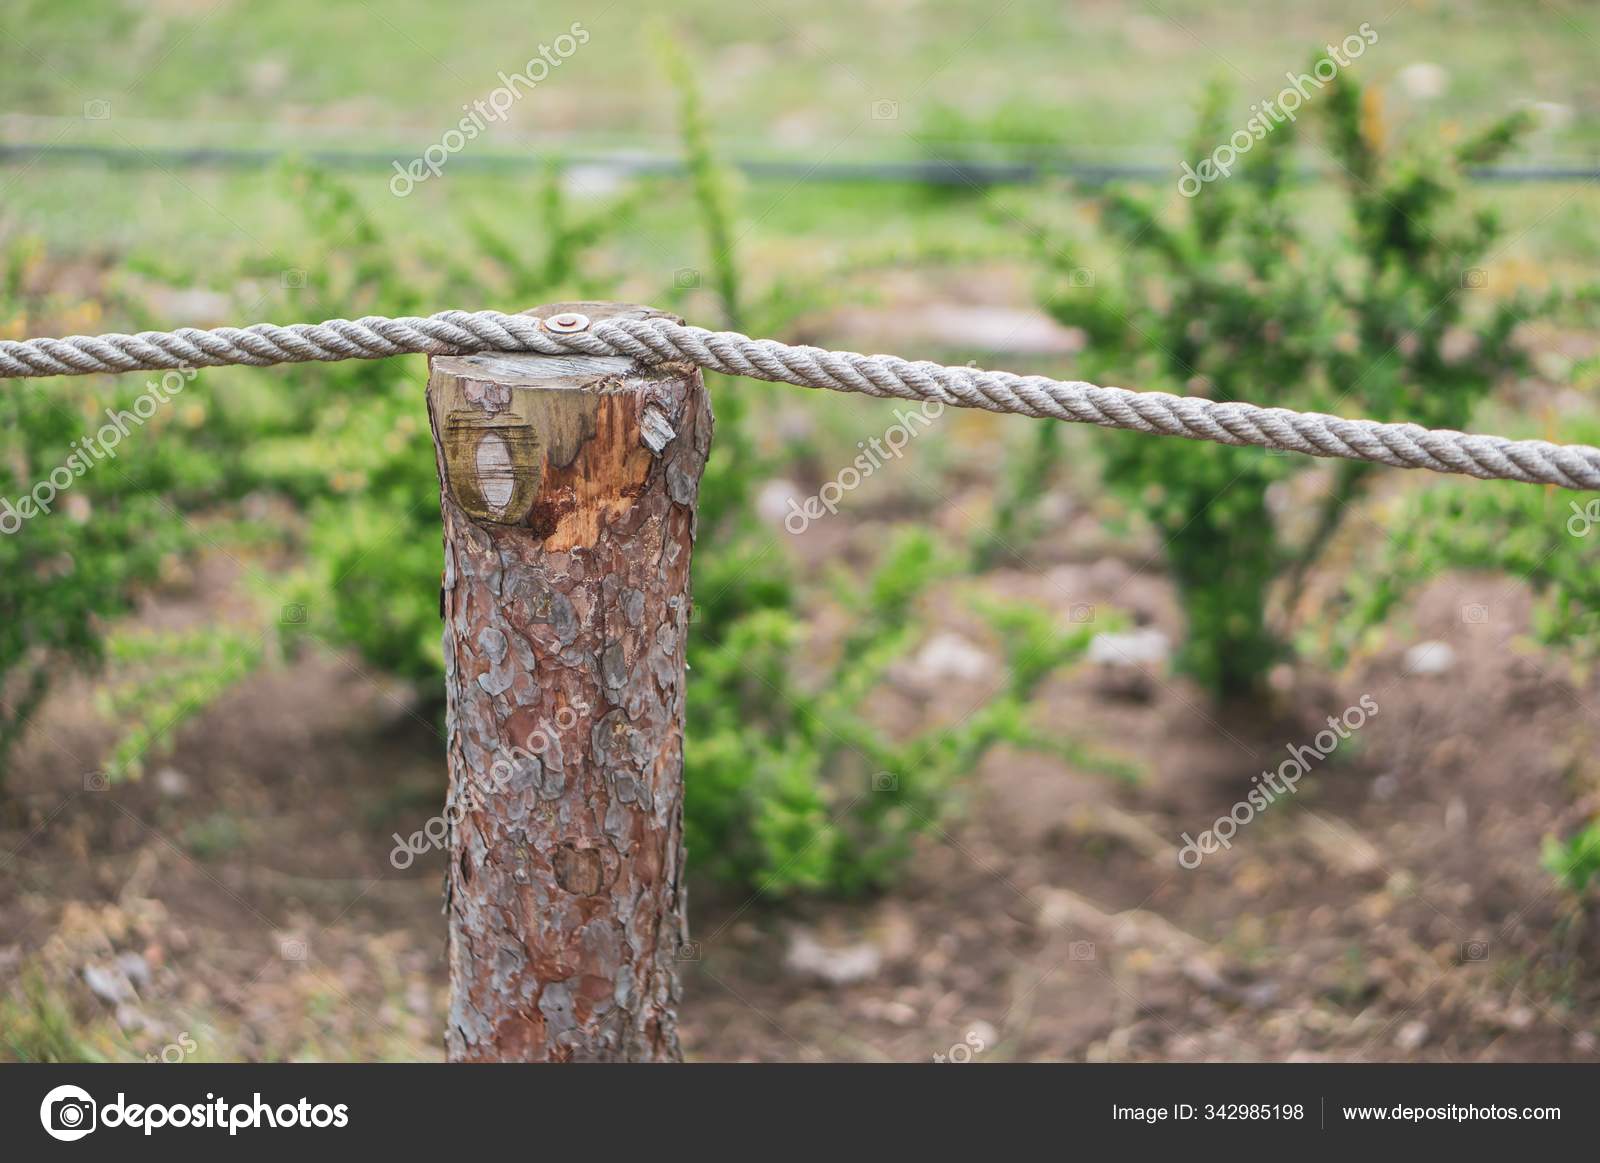 Fence Made Wood Rope Garden Plants Background Stock Photo by